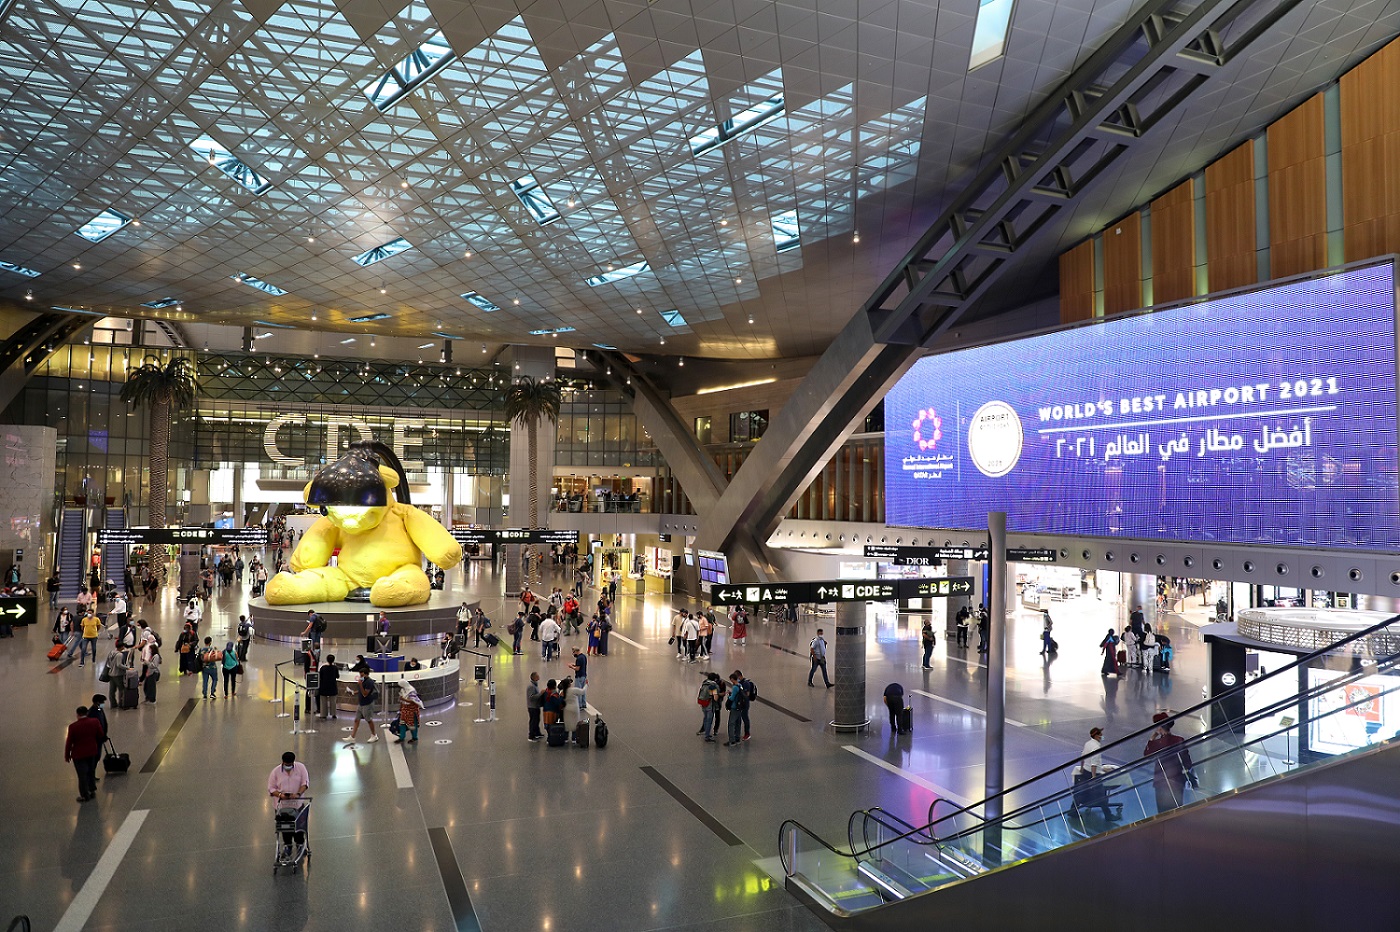 Hamad International Airport In Qatar Named World’s Best Airport 2021 By 5EC